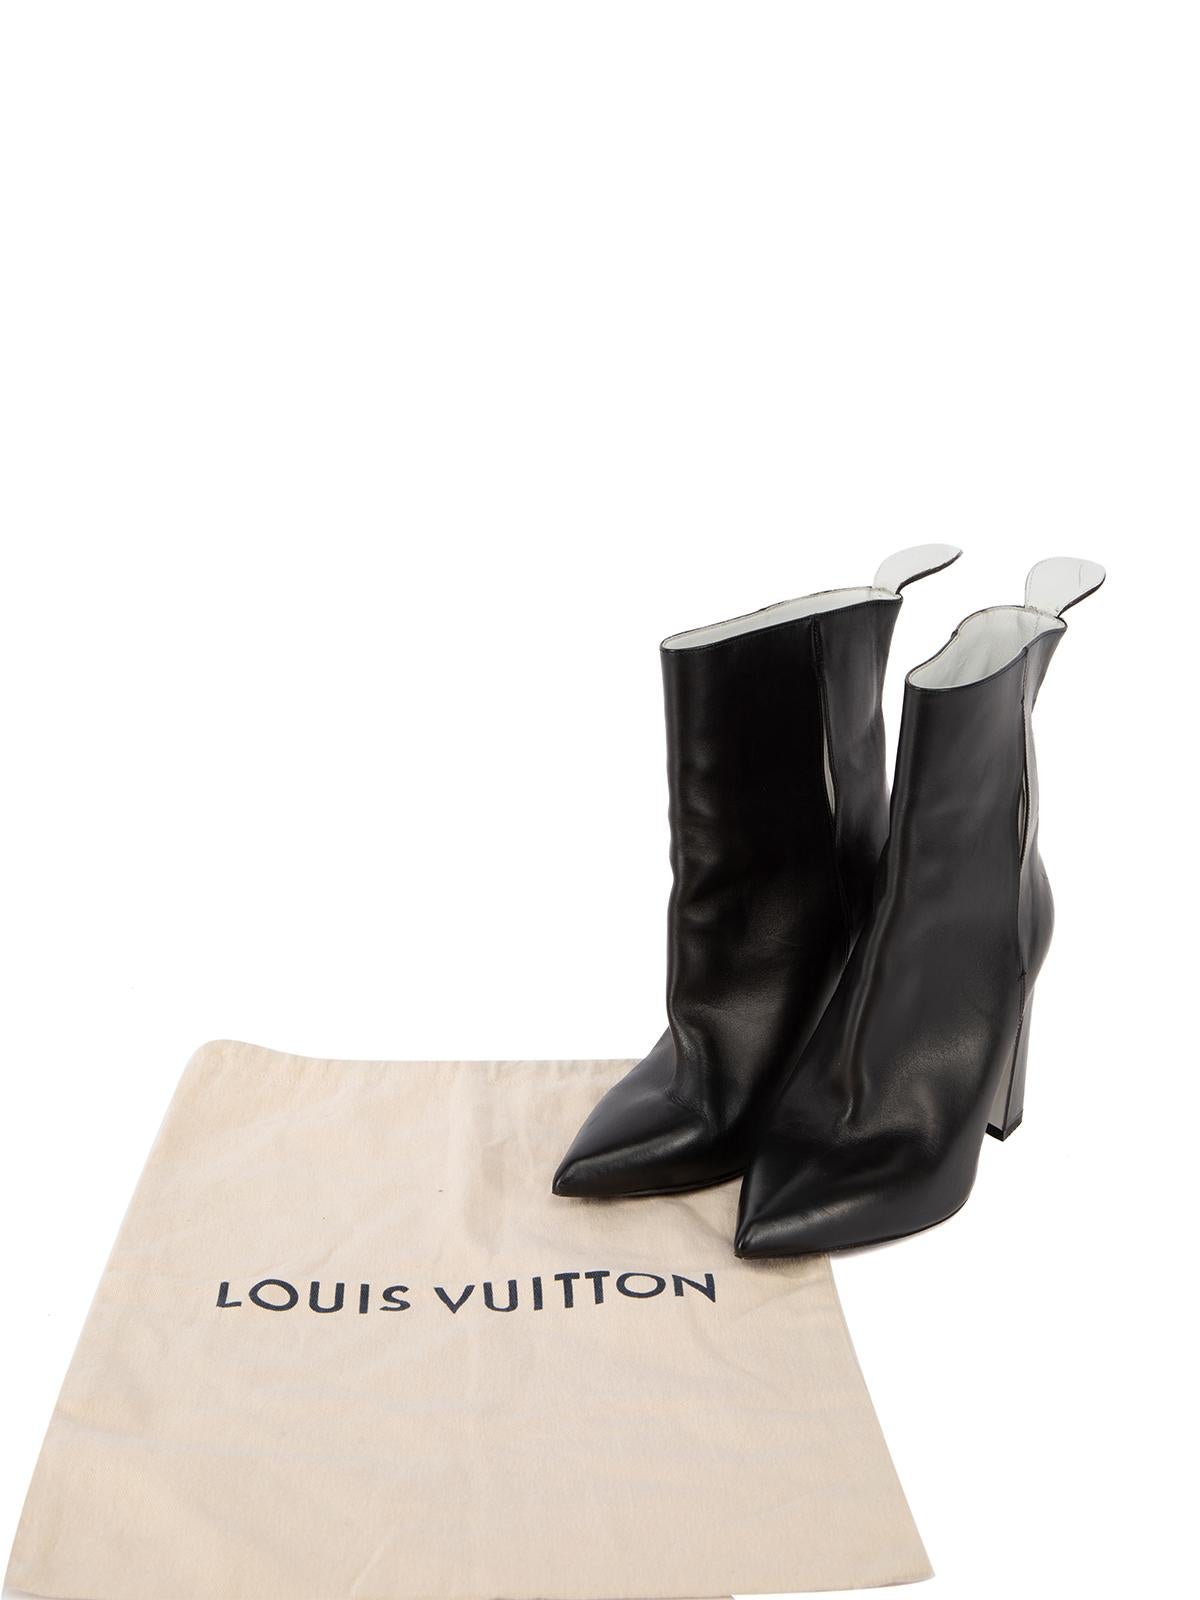 Pre-Loved Louis Vuitton Women's Leather Pointed Ankle Boots with Branded  1